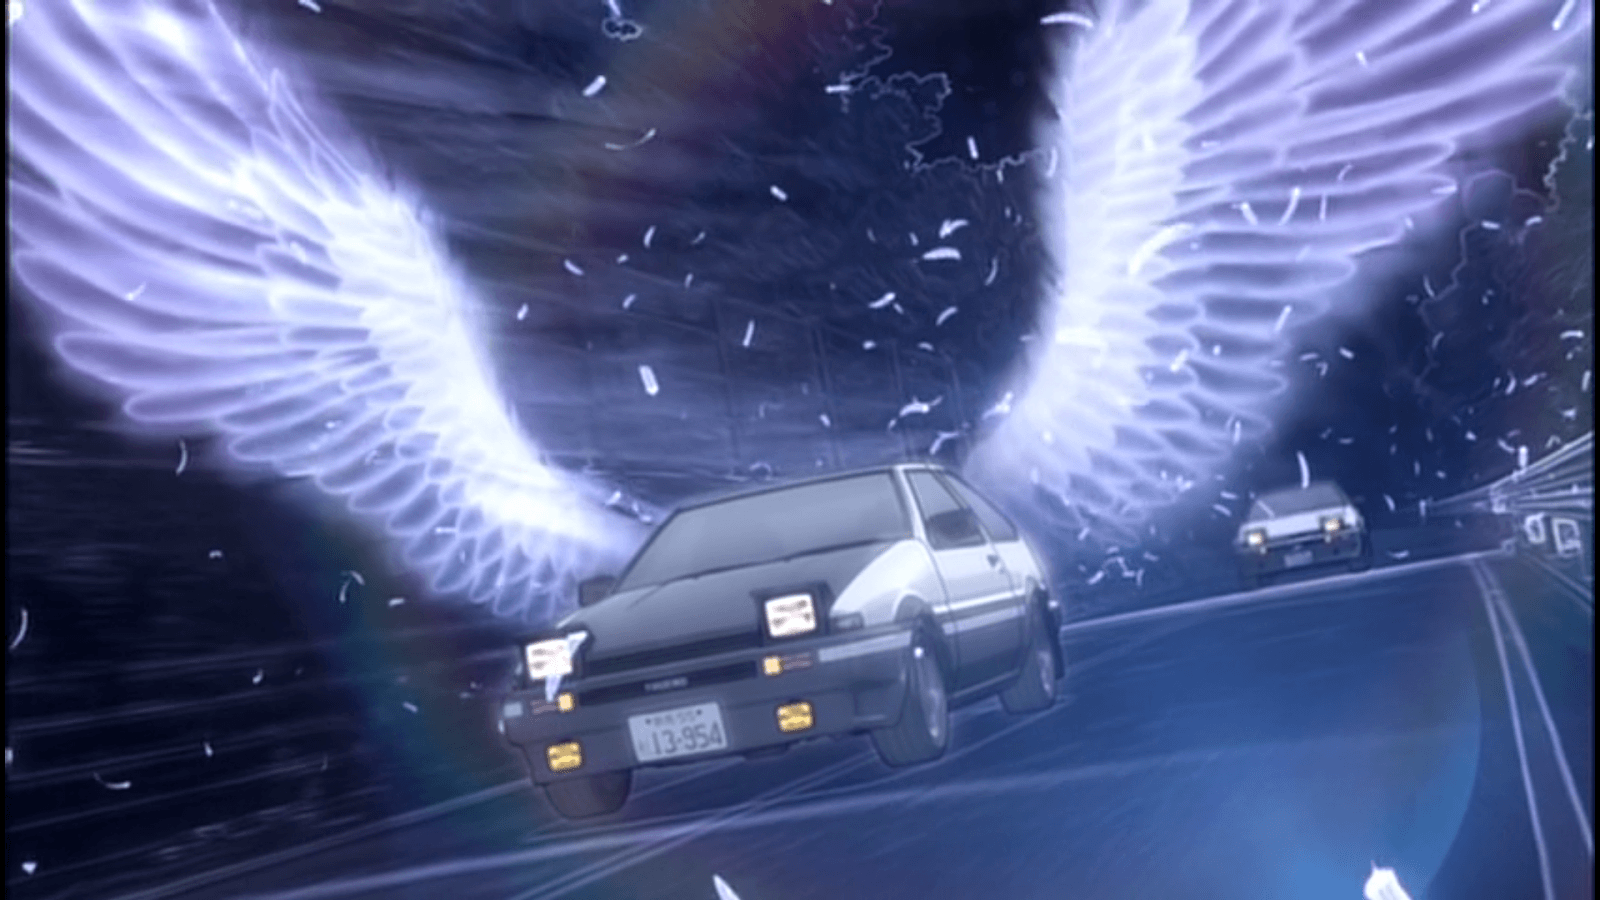 How Initial D changed my life